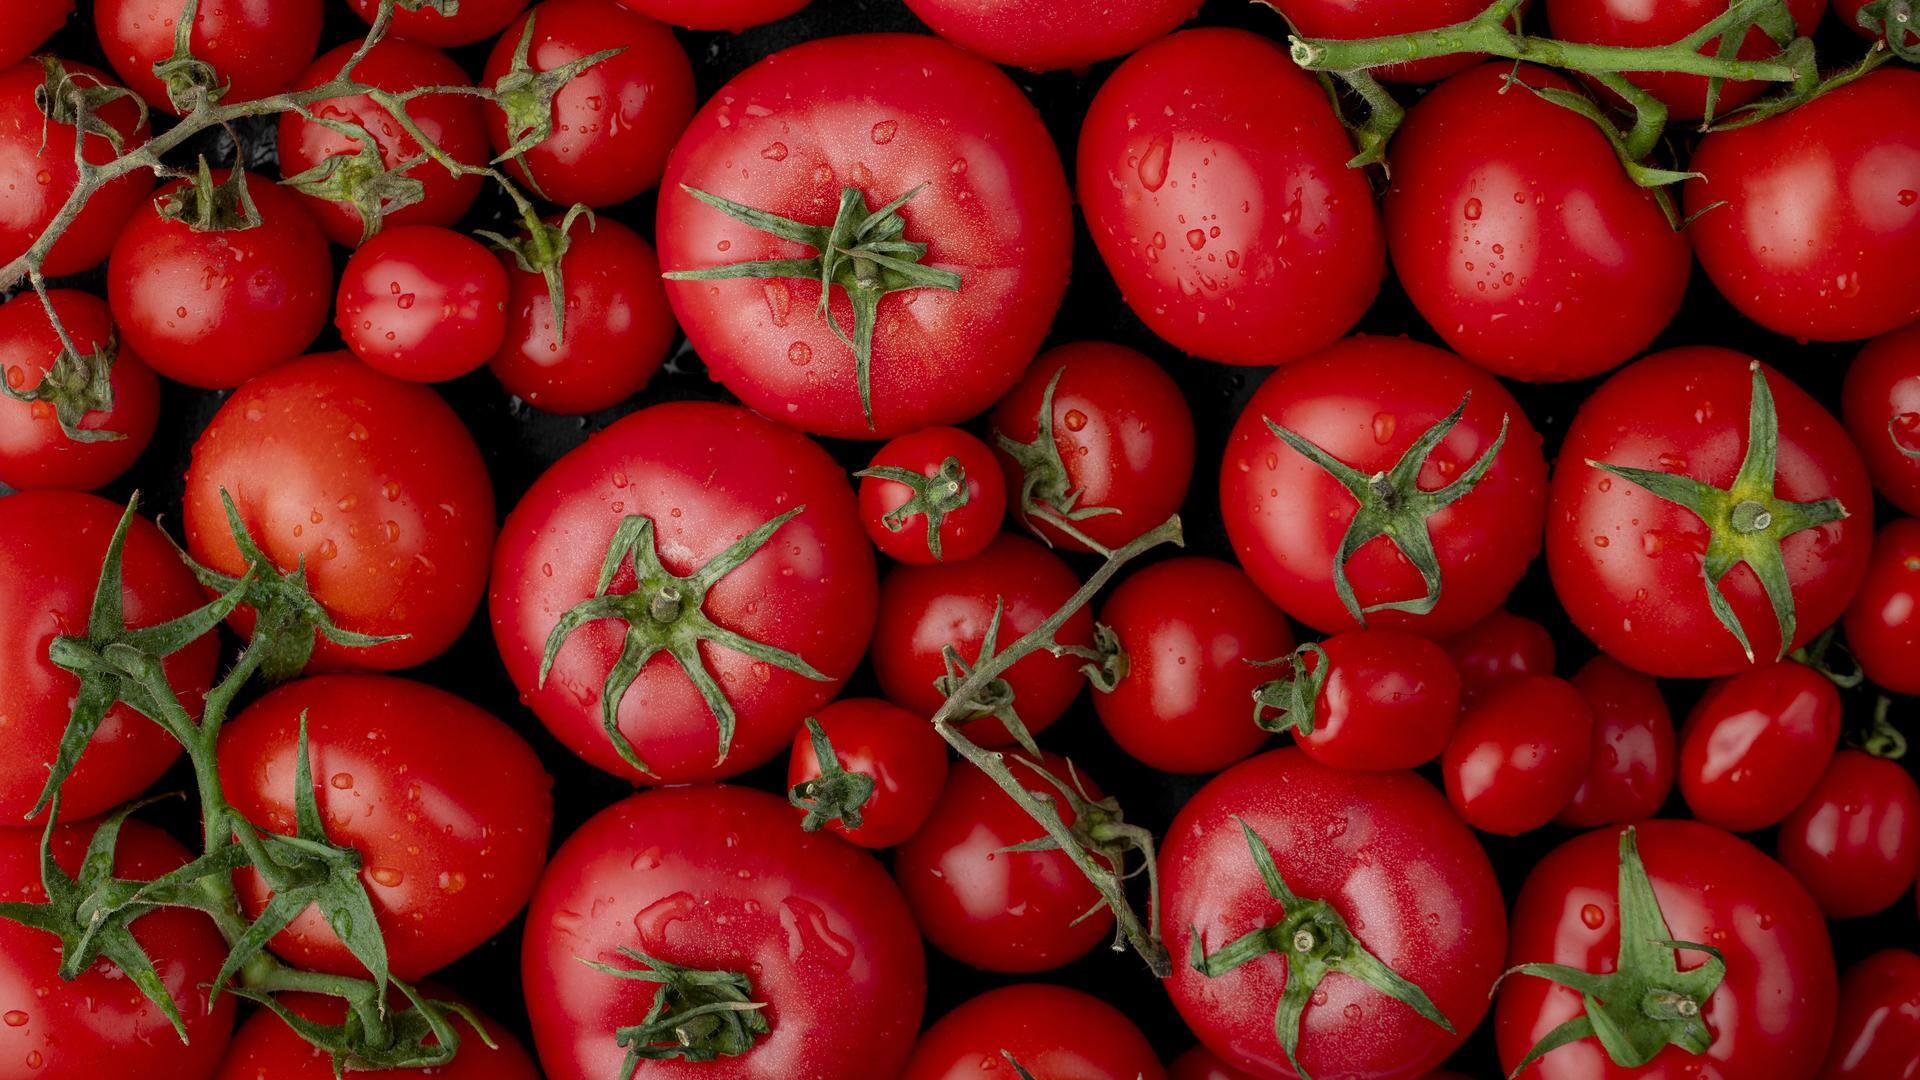 Why tomato prices doubled in days reaching Rs. 100/kg